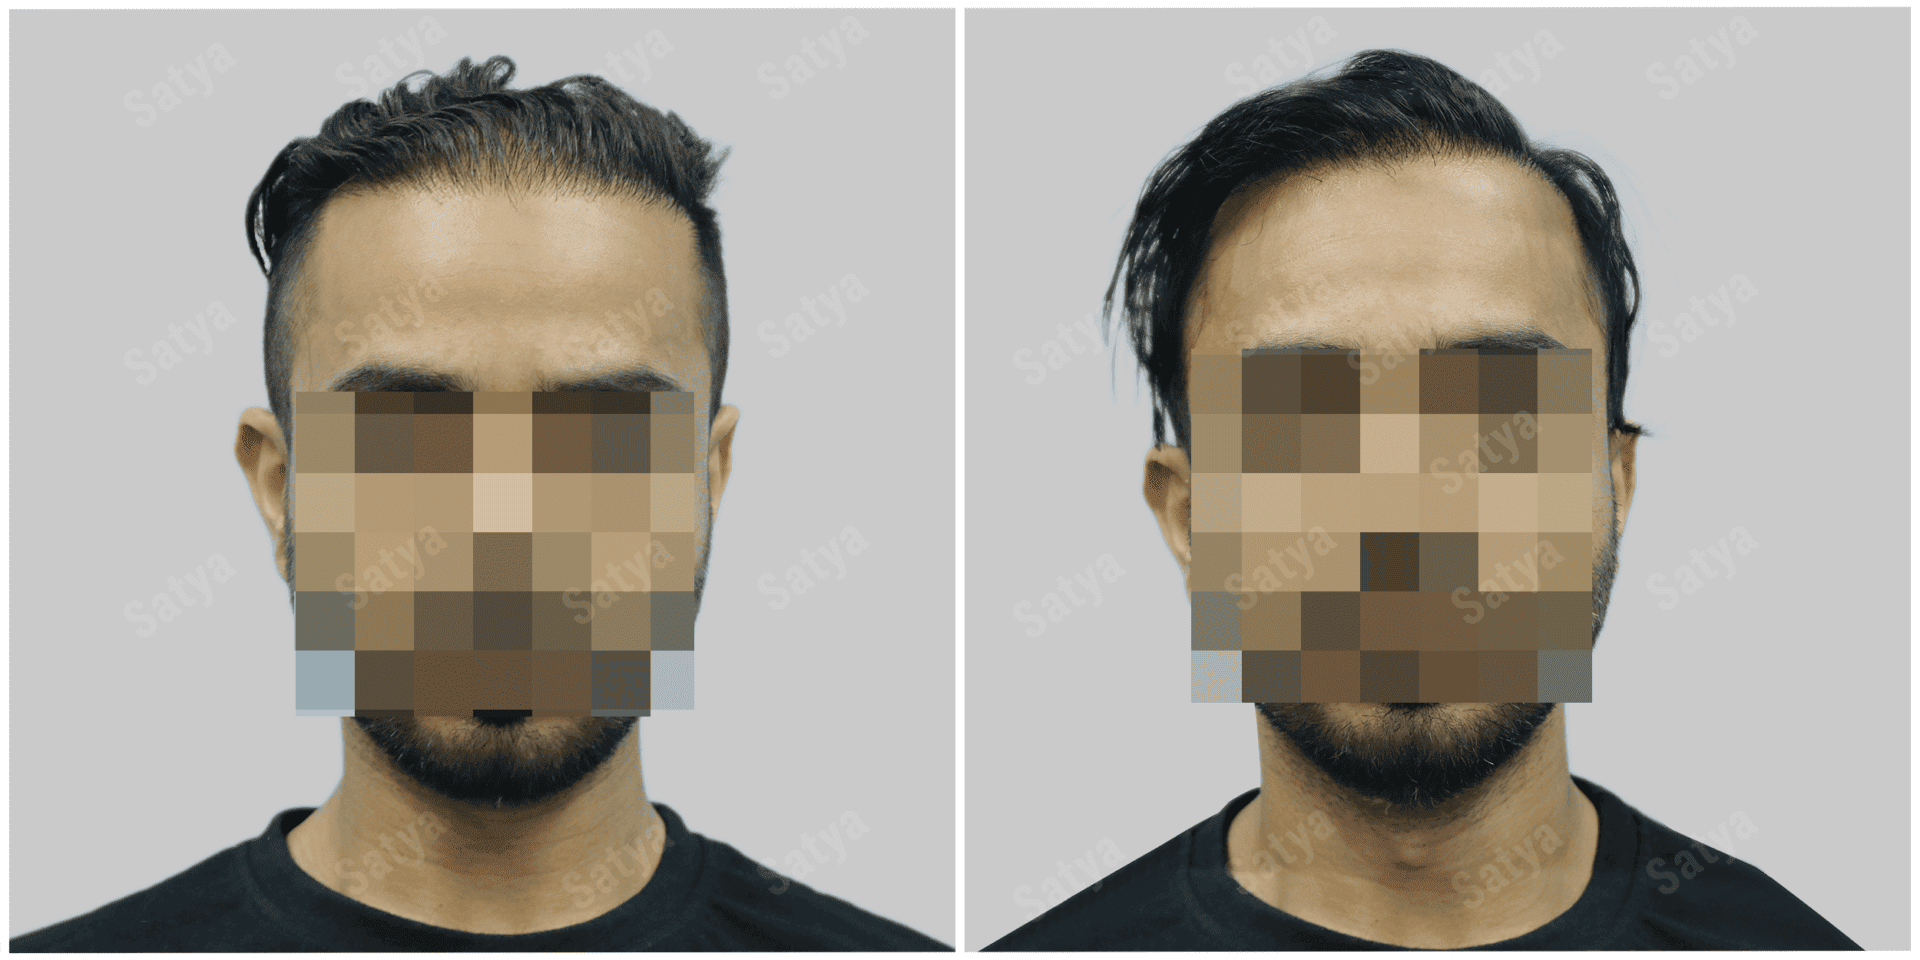 hair transplant results before and after